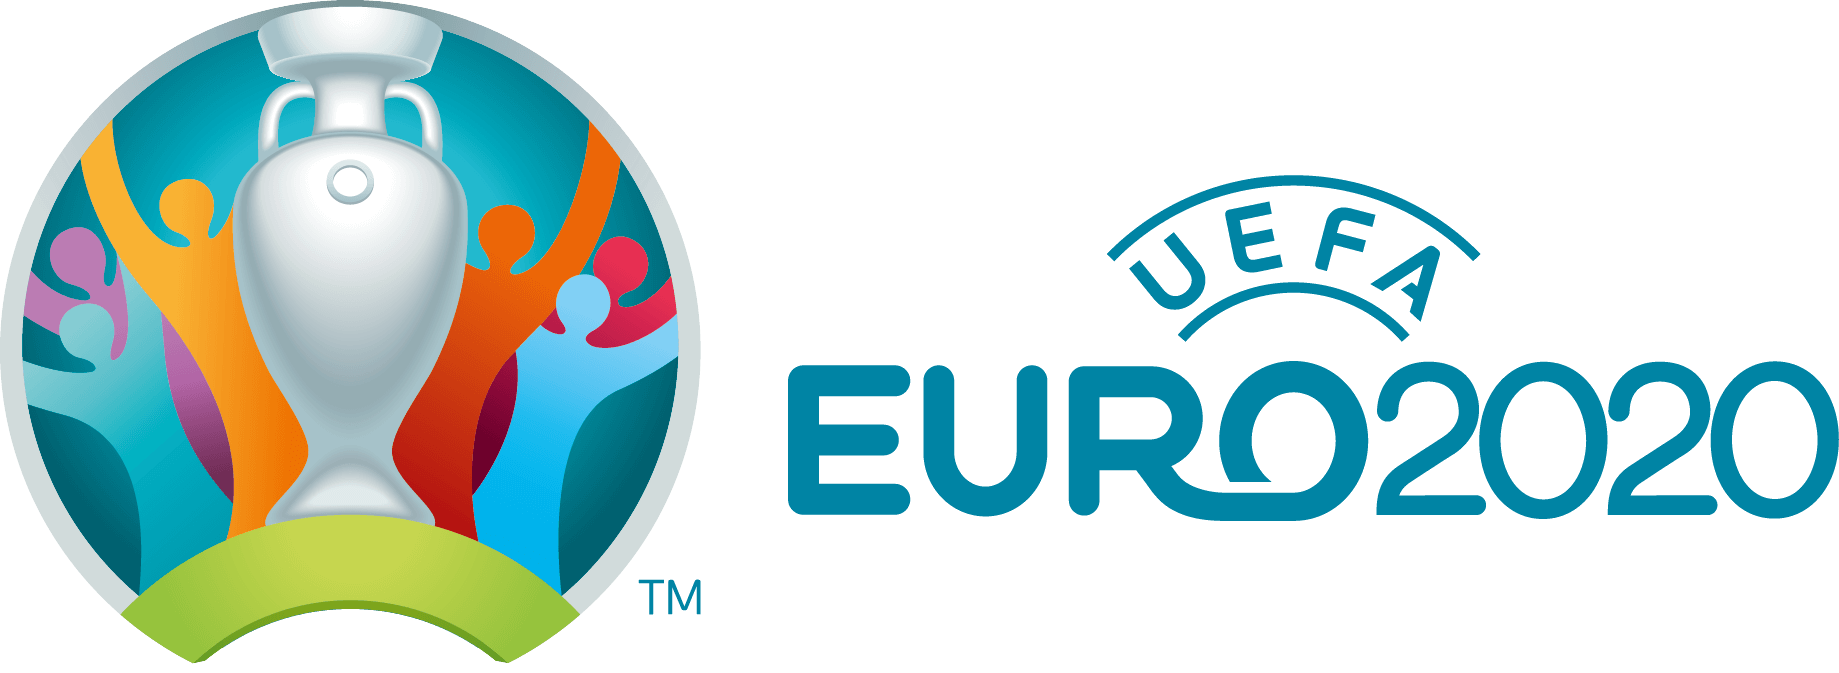 Uefa Euro 2020 Logo Png / Talents - Scouting Arena